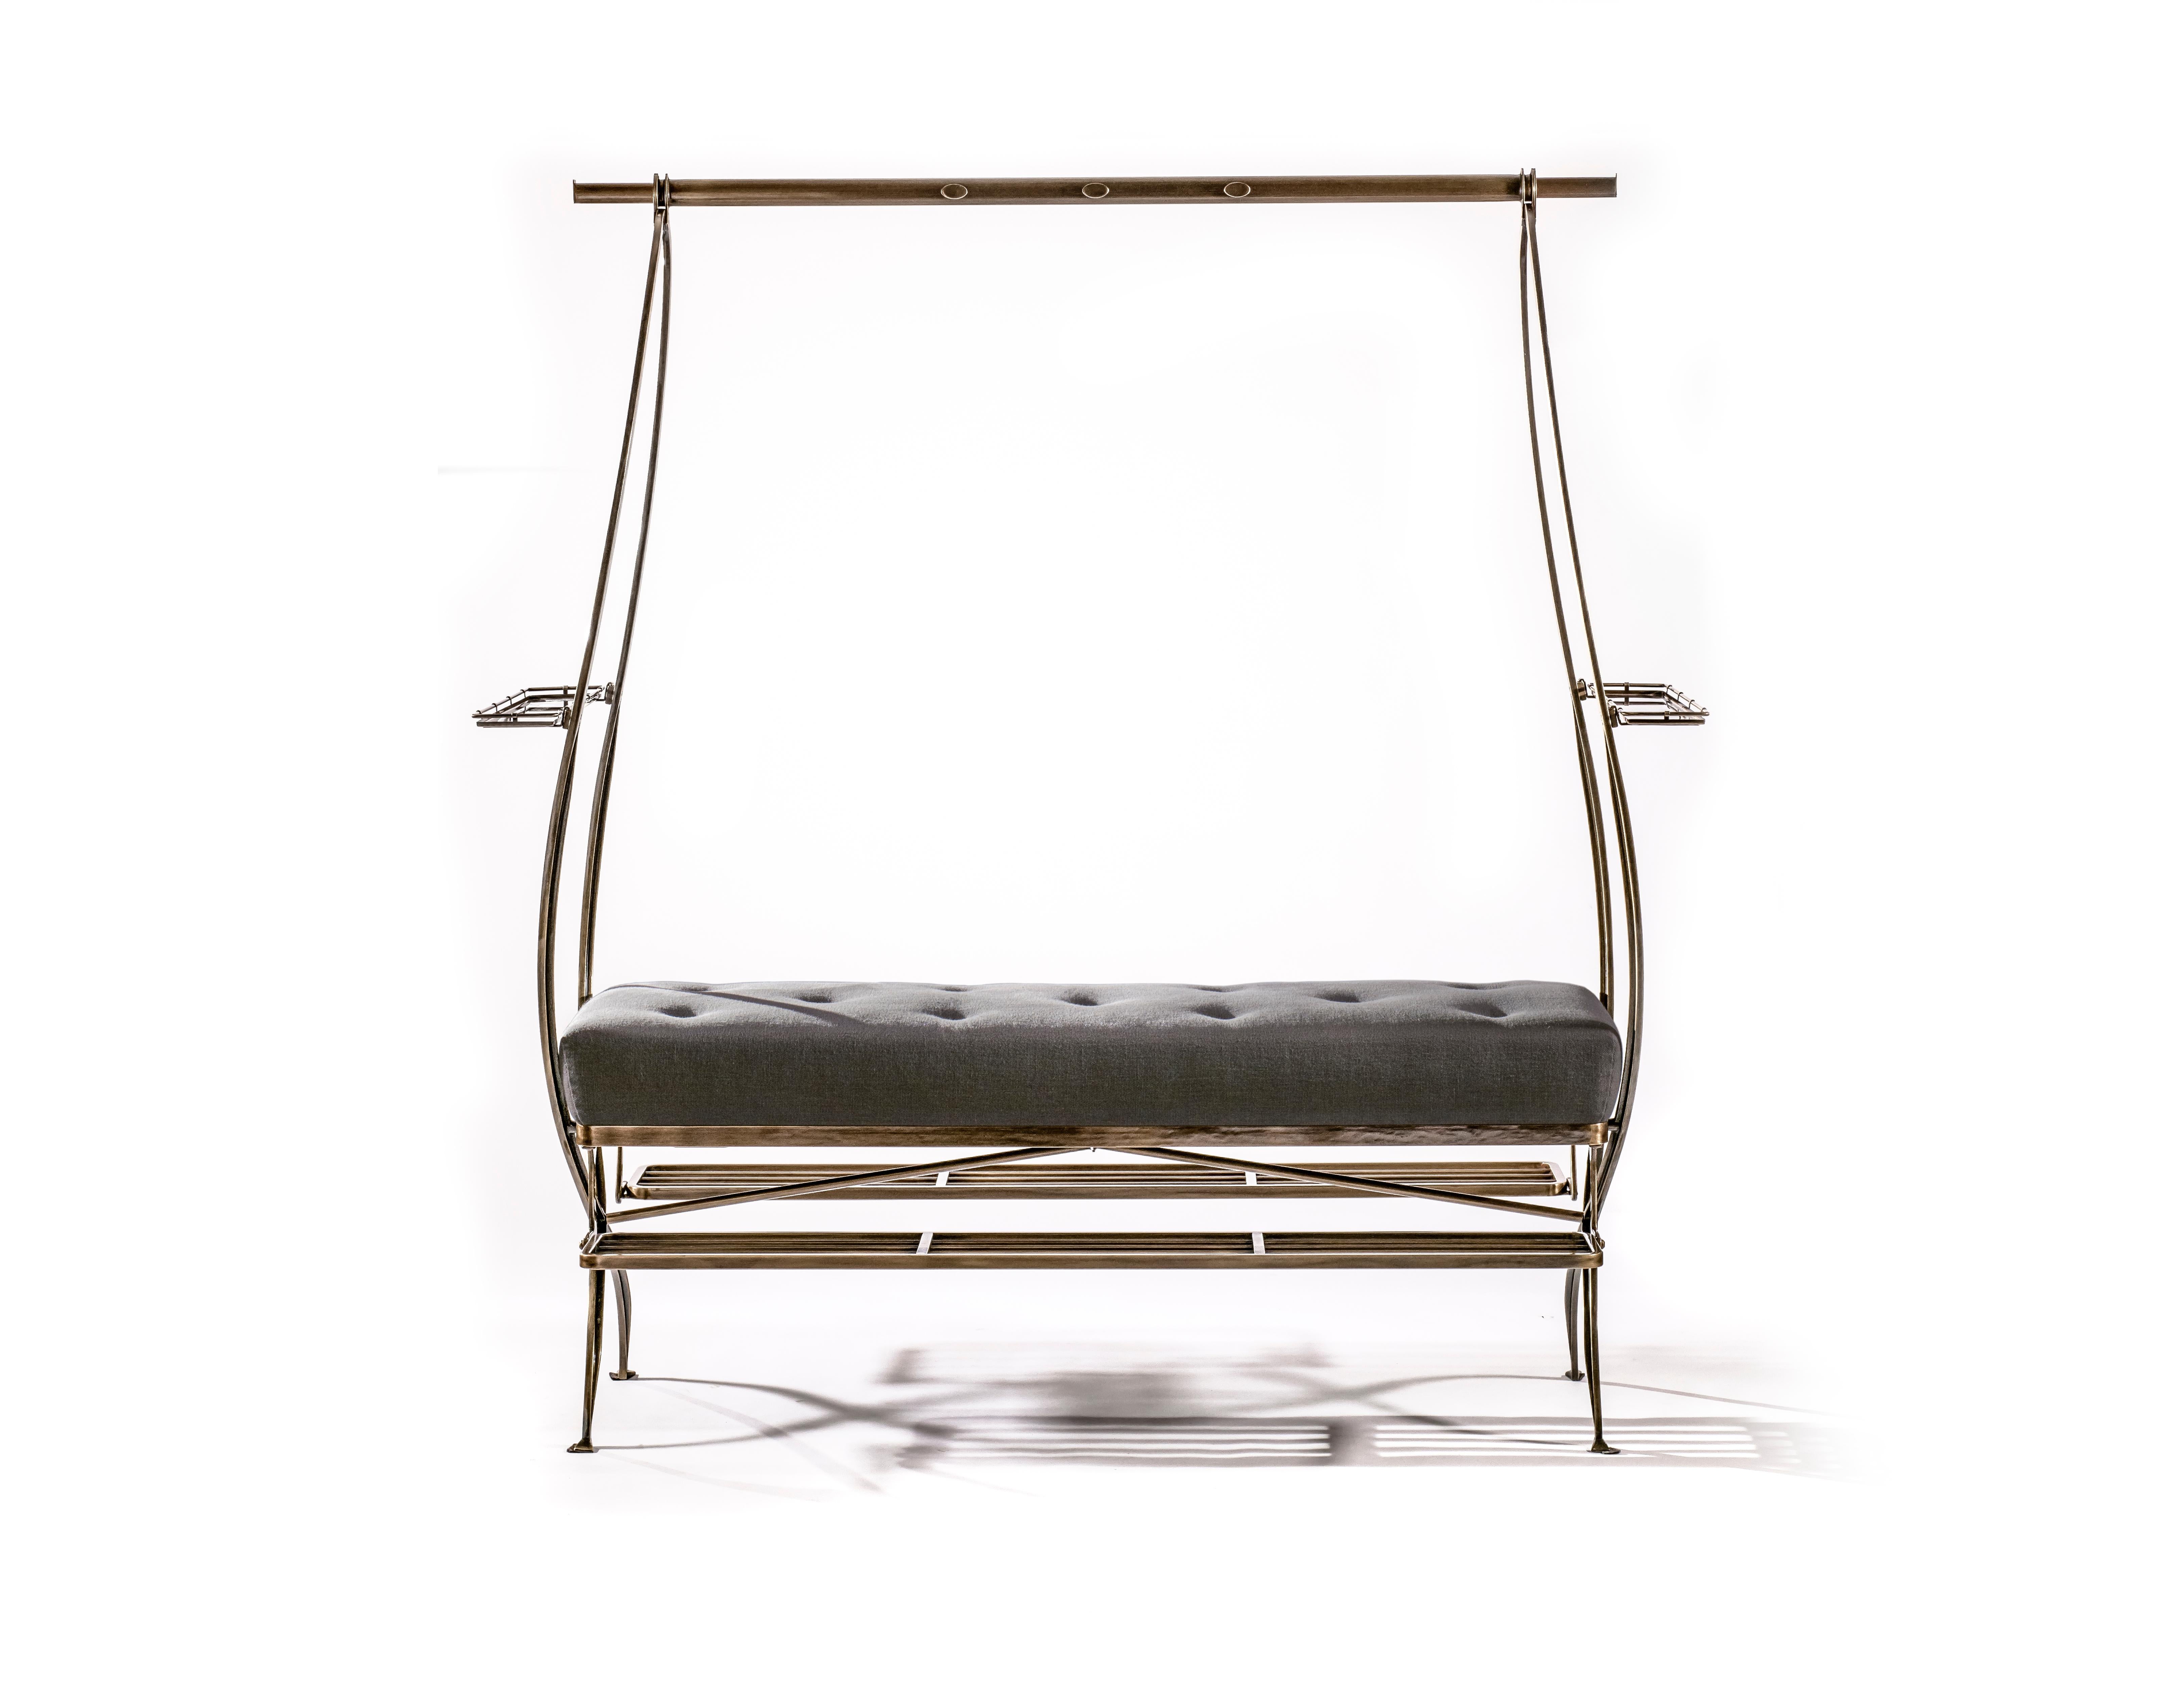 Bronze-plated steel framed dressing bench with upholstered seat, extending superstructure and foldable footrests.

B.B. - The sinuous form merges into perfect valet function. This piece works well when placed centrally in a dressing room where it